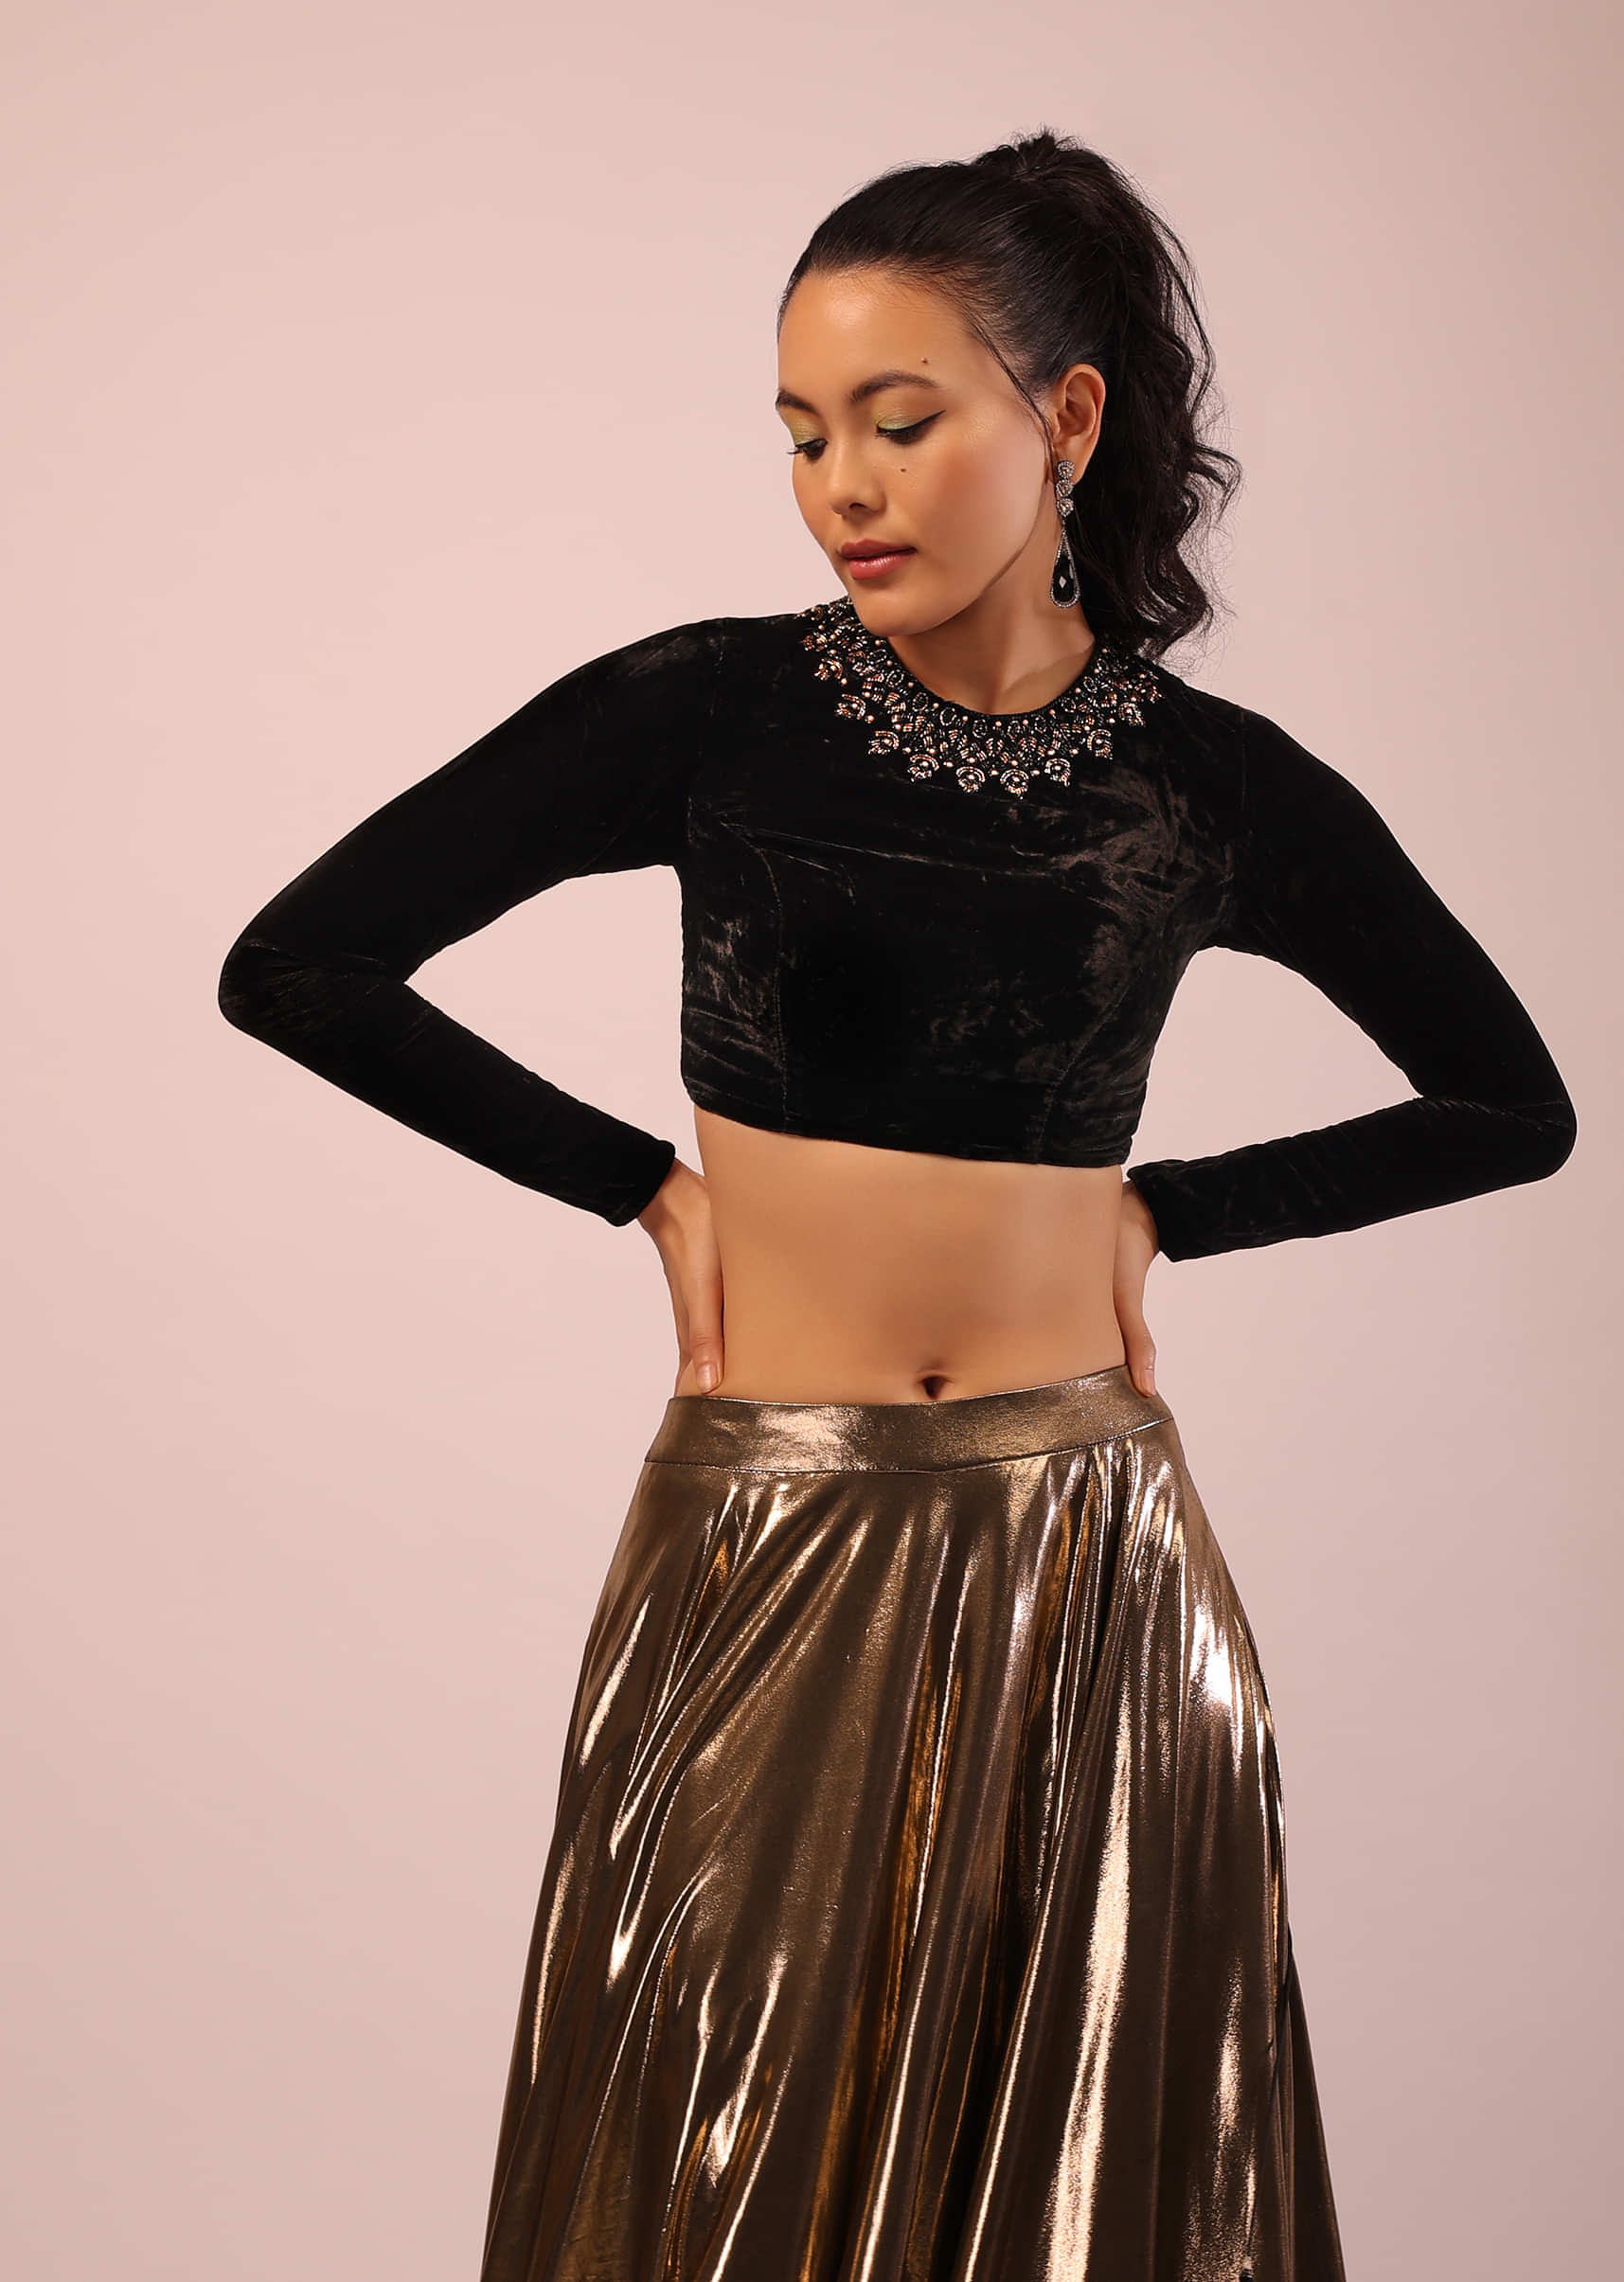 Copper Metallic Skirt And Black Velvet Crop Top Set With Criss Cross Tie Up On The Back